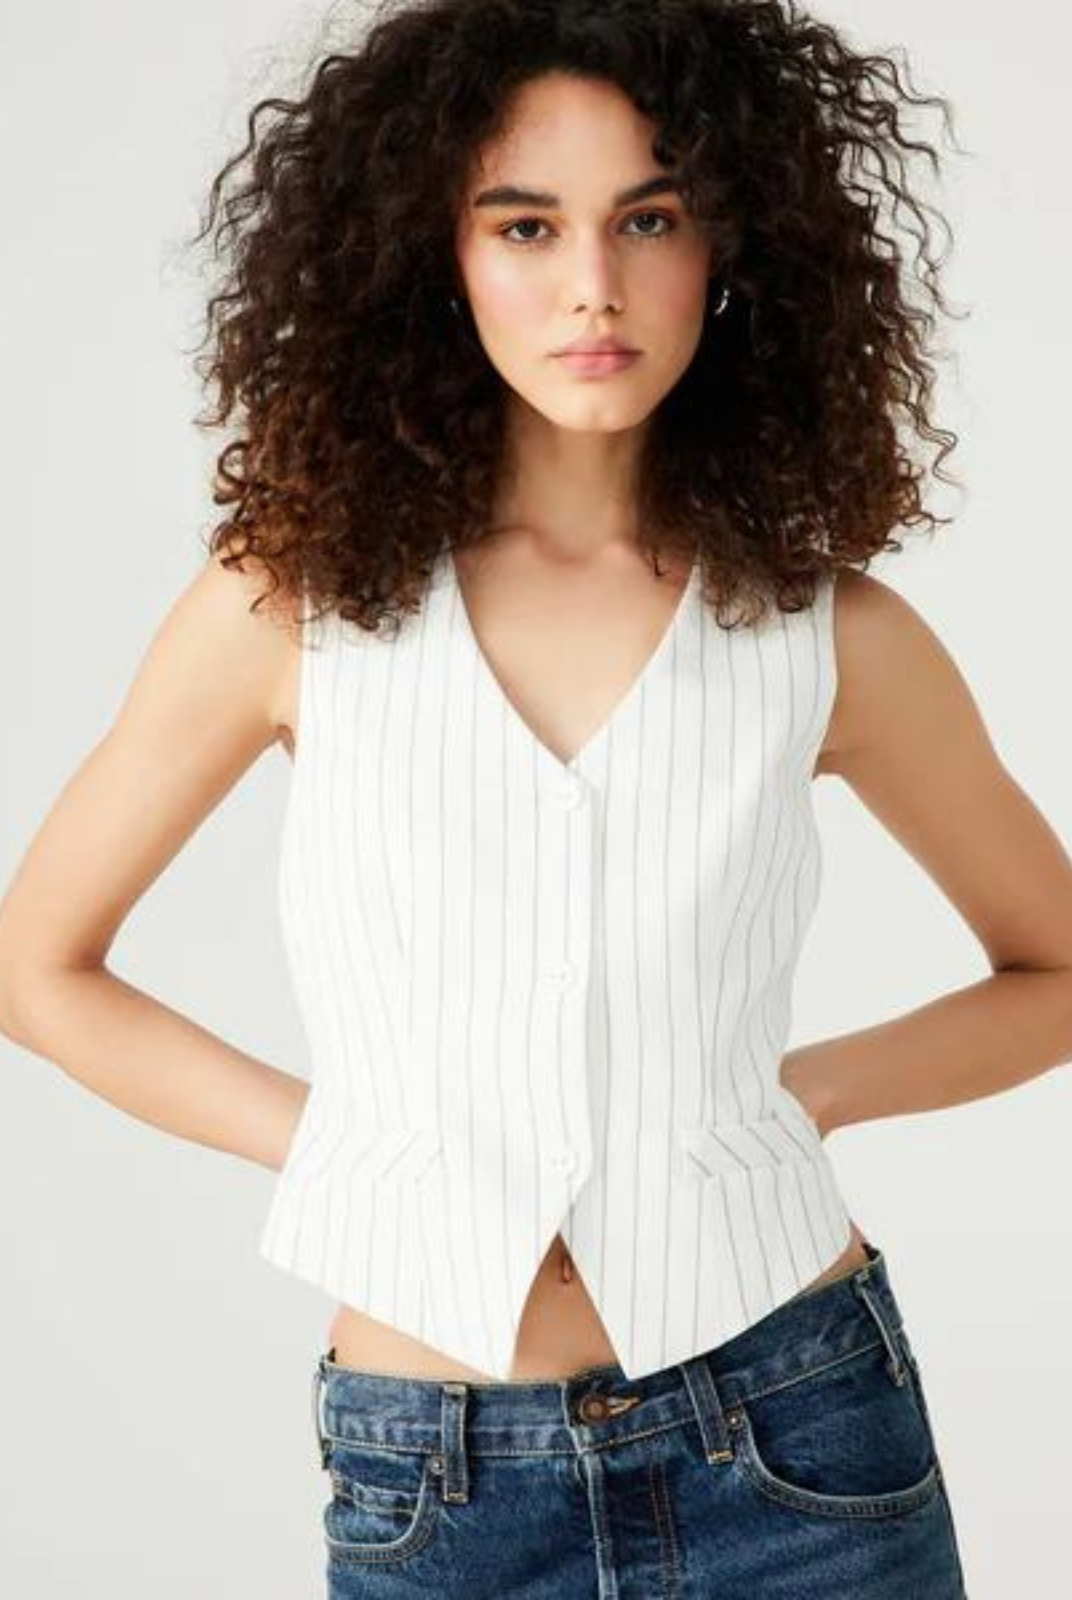 Steve Madden Selena Vest.Elevate your business attire with the SELENE vest. This stylish pinstripe vest top features a three-button closure for a menswear-inspired look. Tailored for a professional fit, this vest is a must-have for modern business fashion.